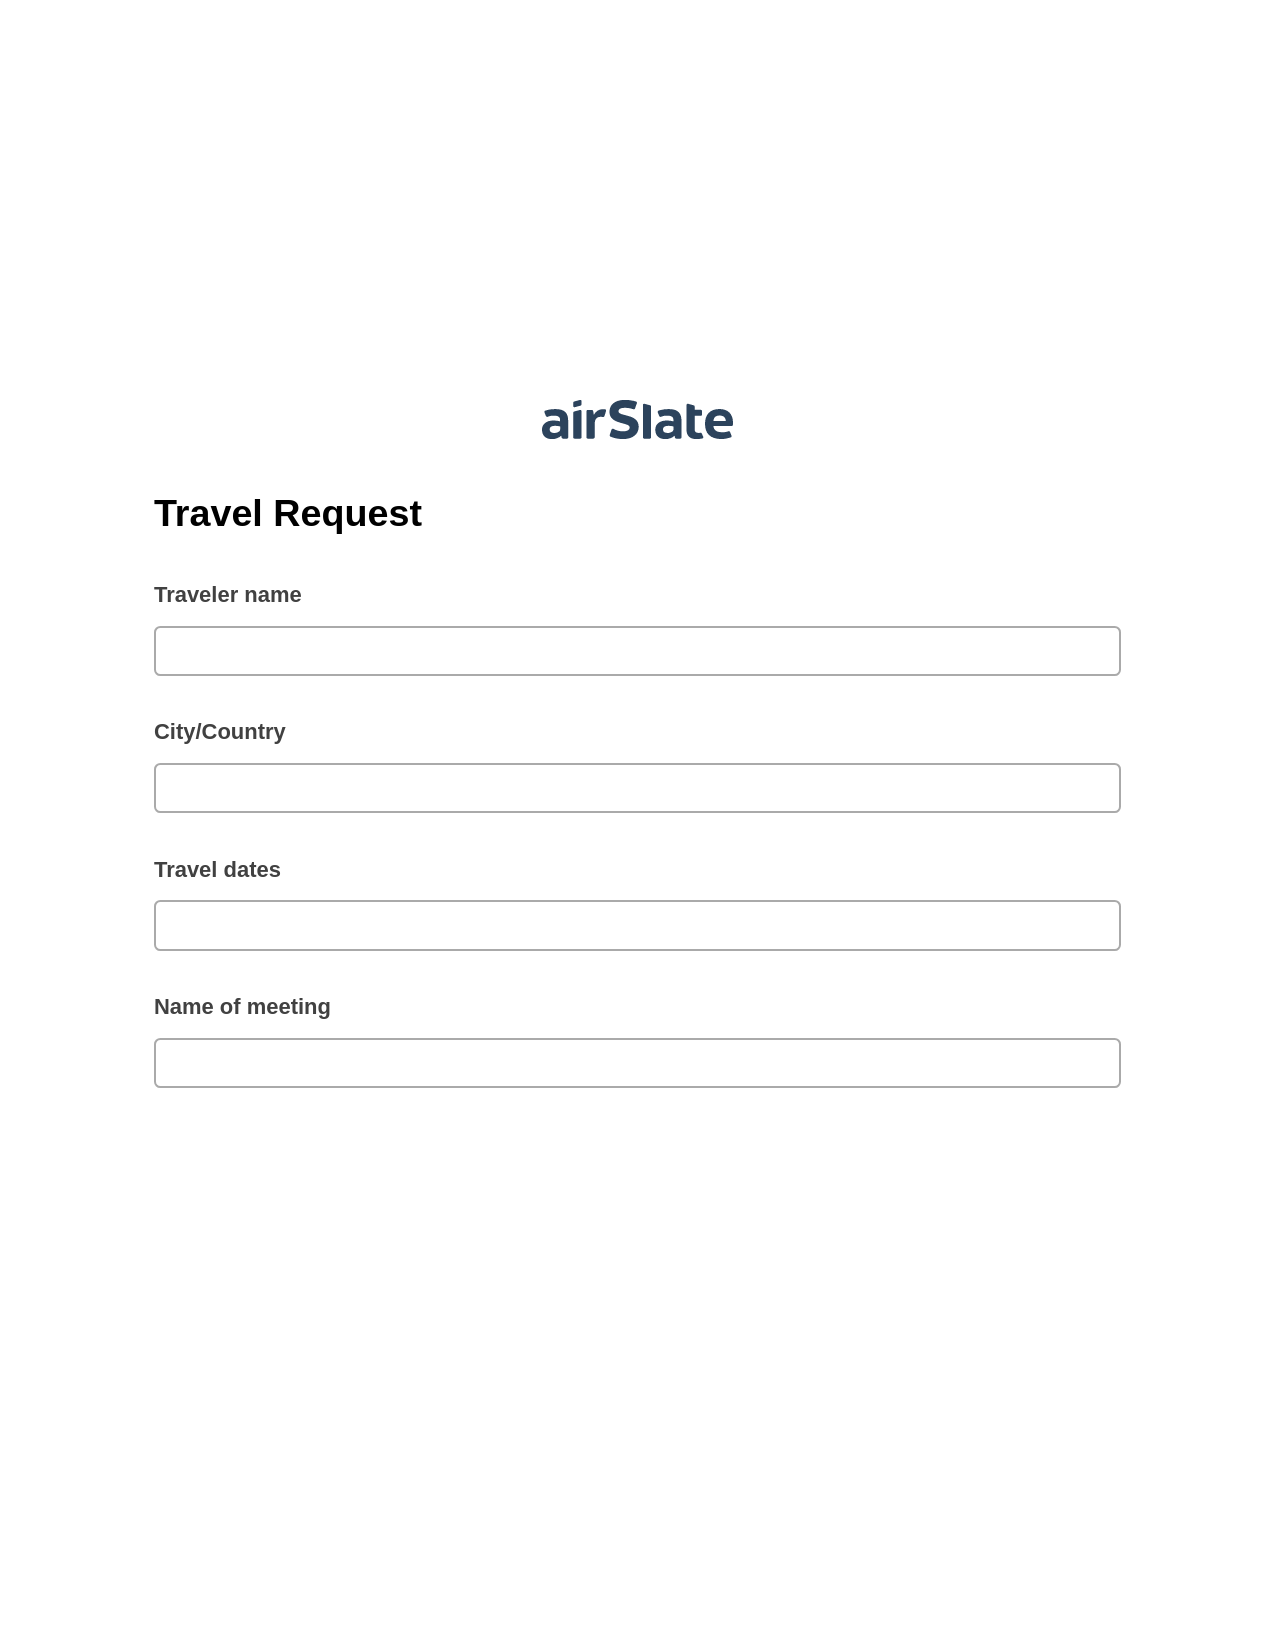 Travel Request Pre-fill Dropdowns from Google Sheet Bot, Create slate addon, Archive to SharePoint Folder Bot